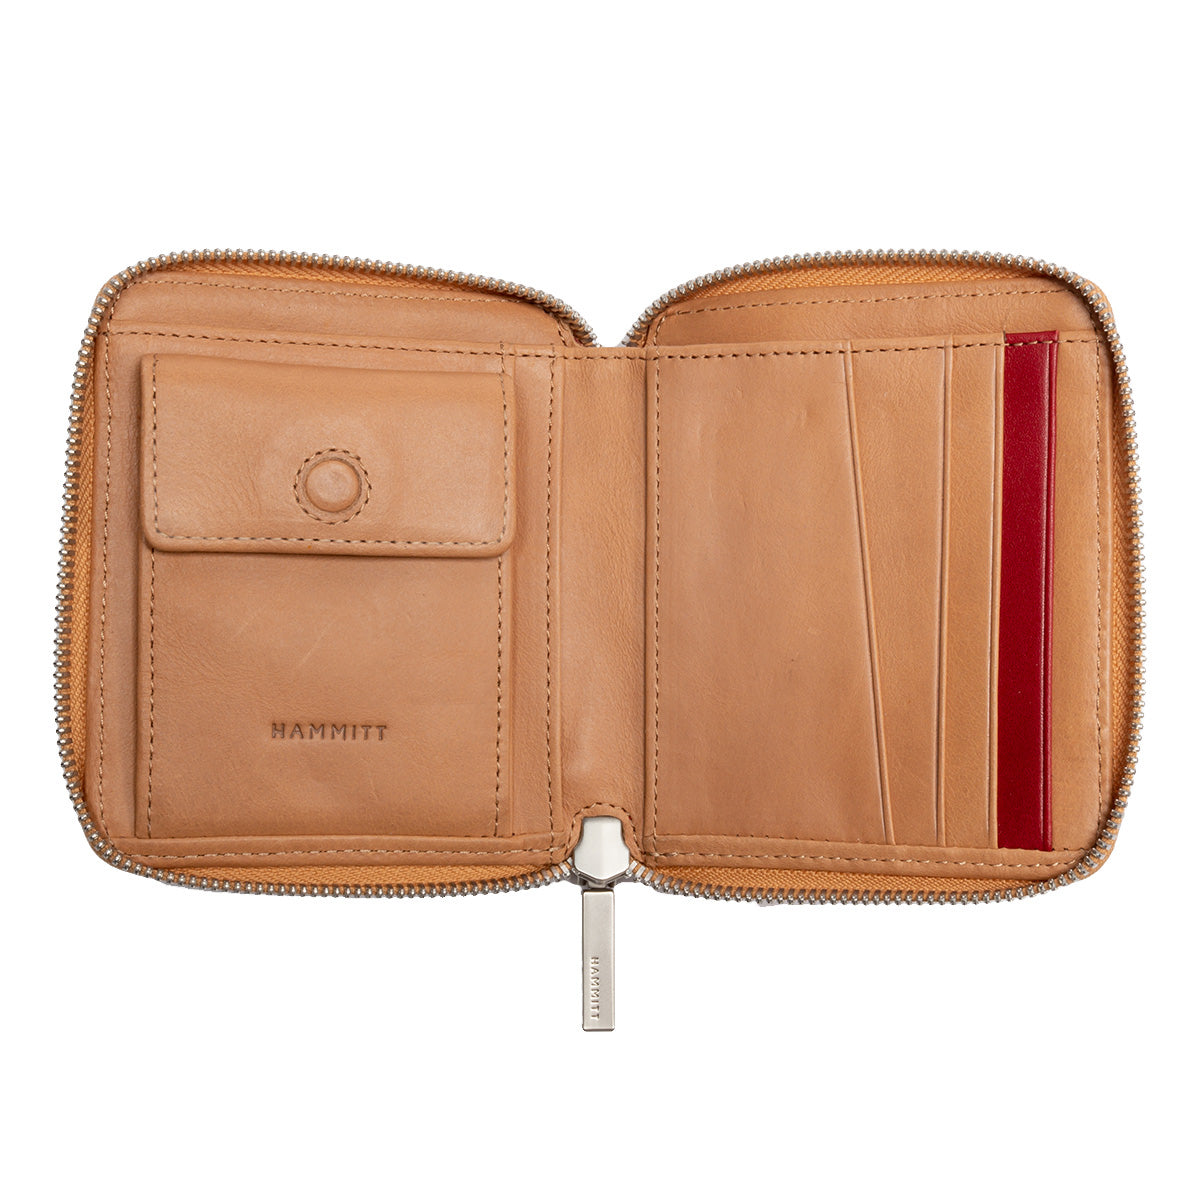 5 North Wallet - Almond Tan Brushed Silver